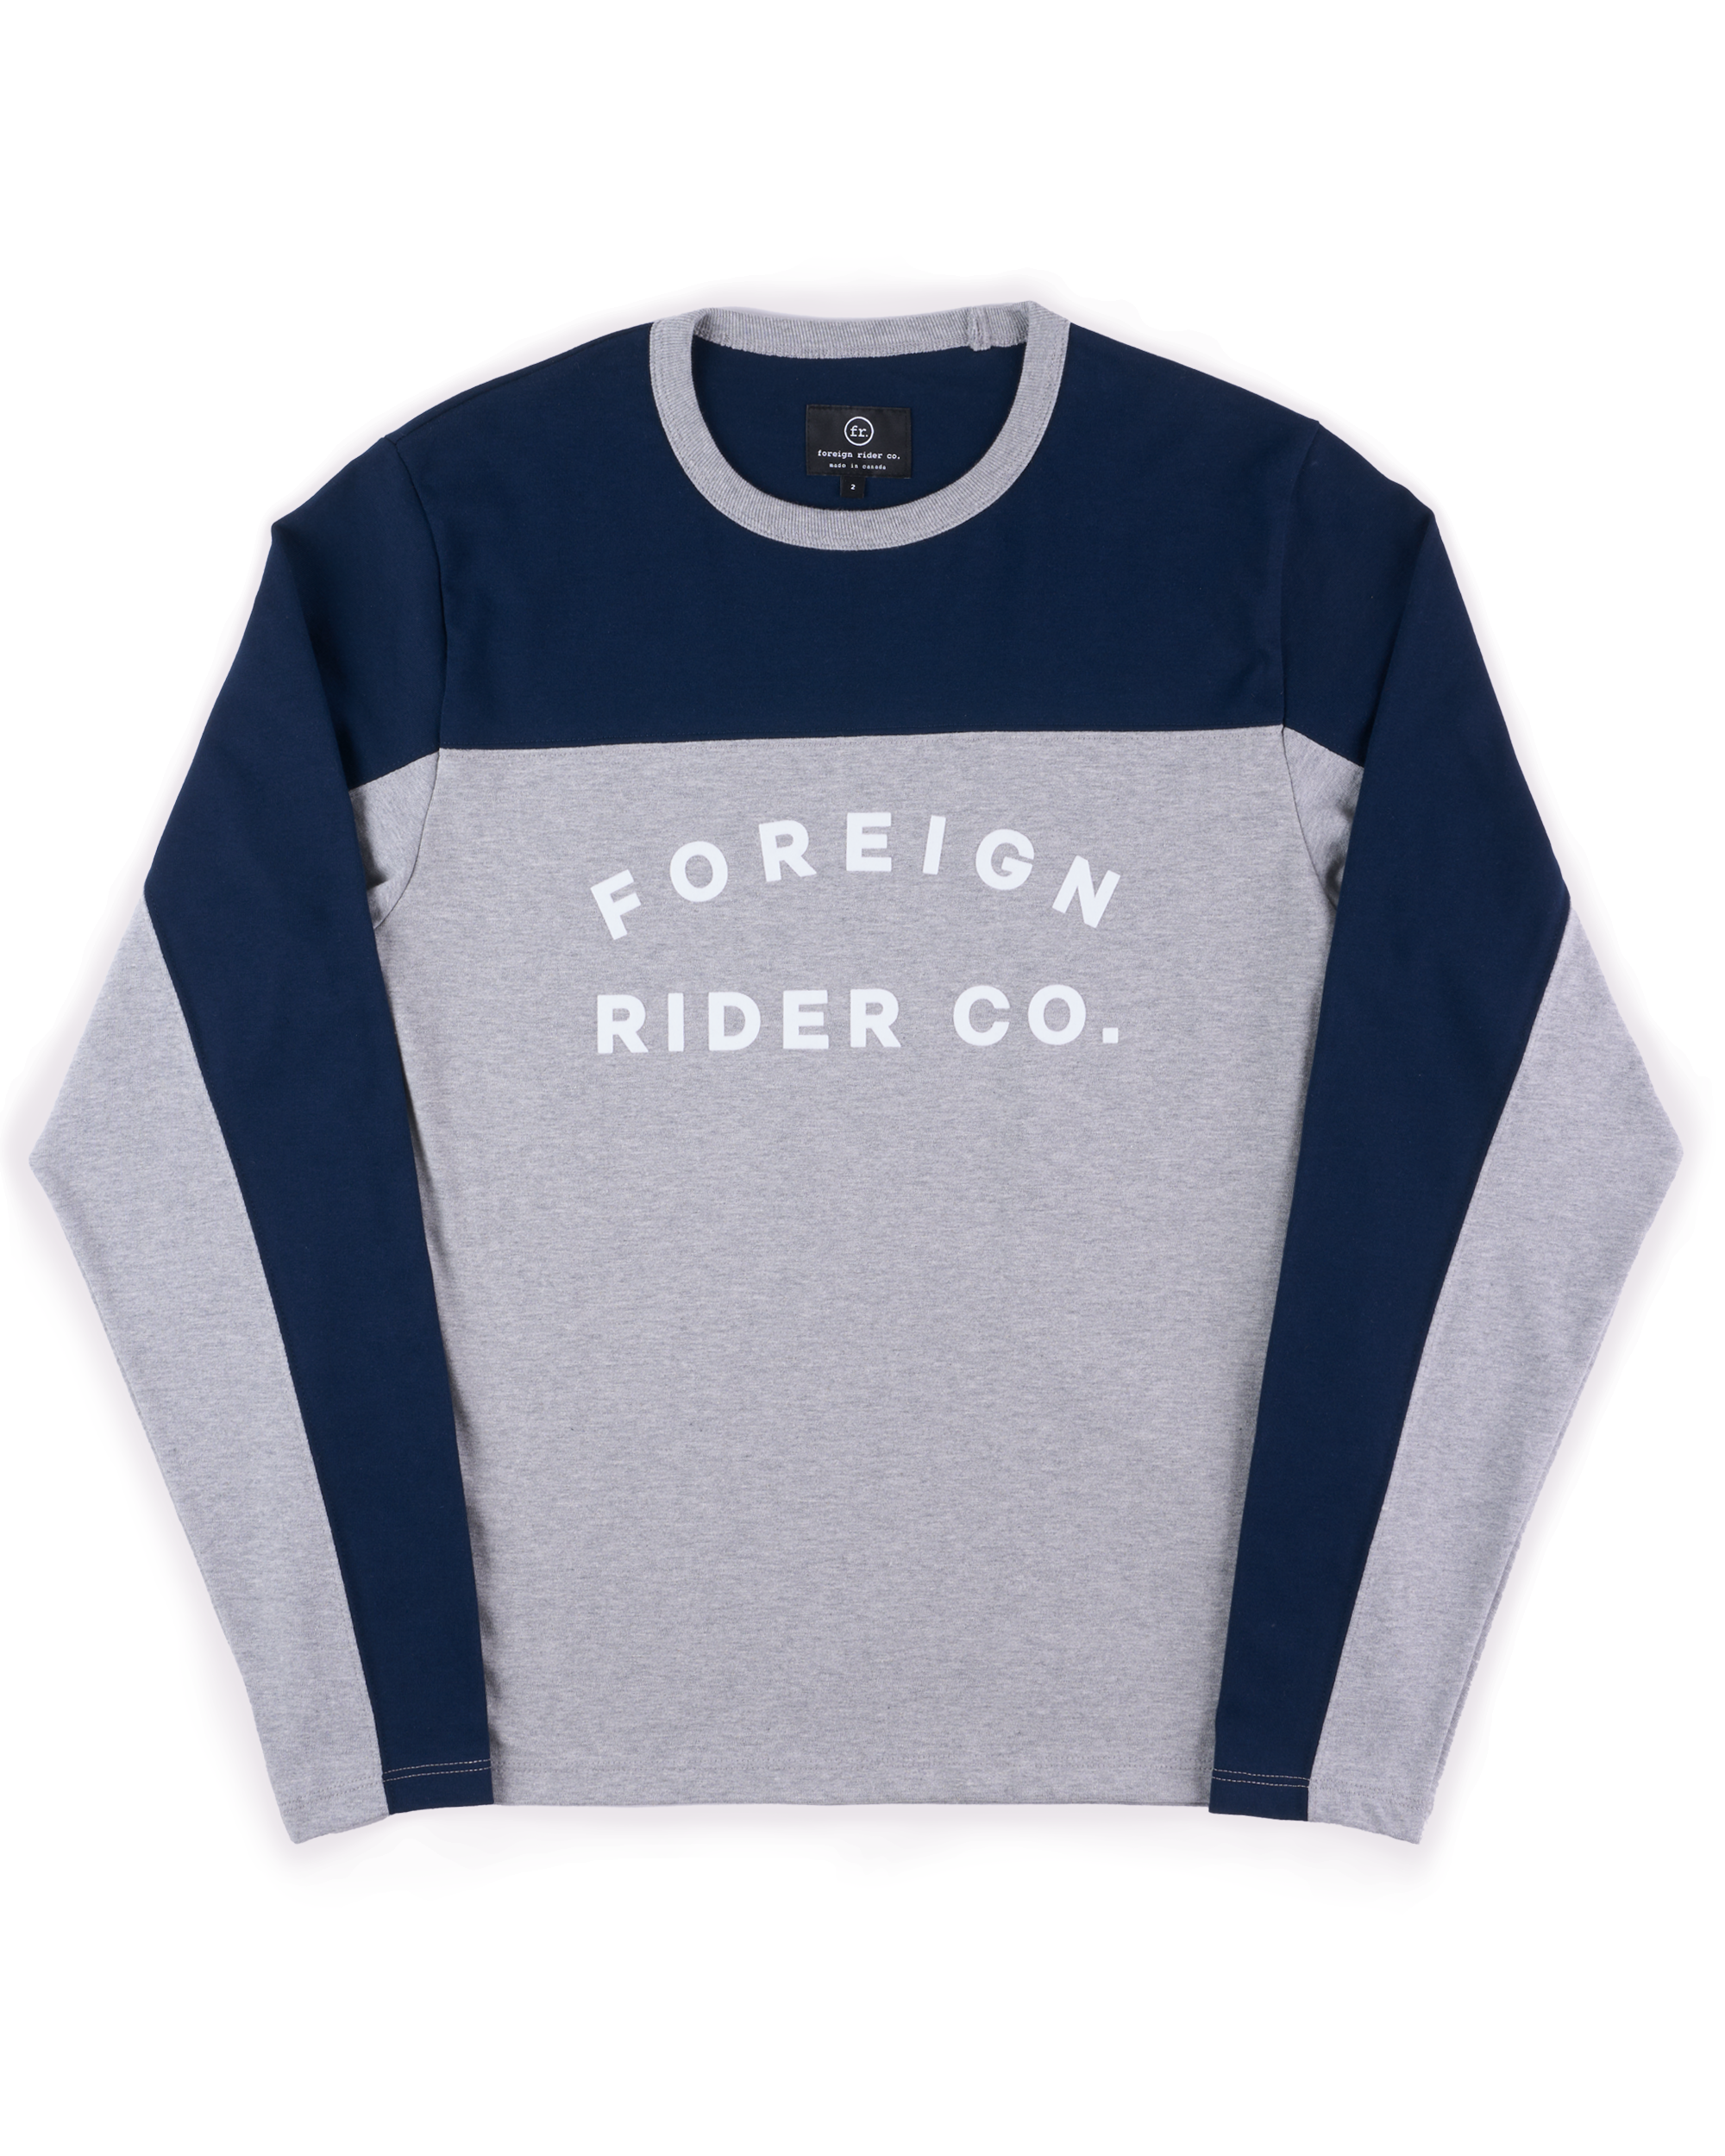 FR. Moto Jersey Navy / Grey - Foreign Rider Co.